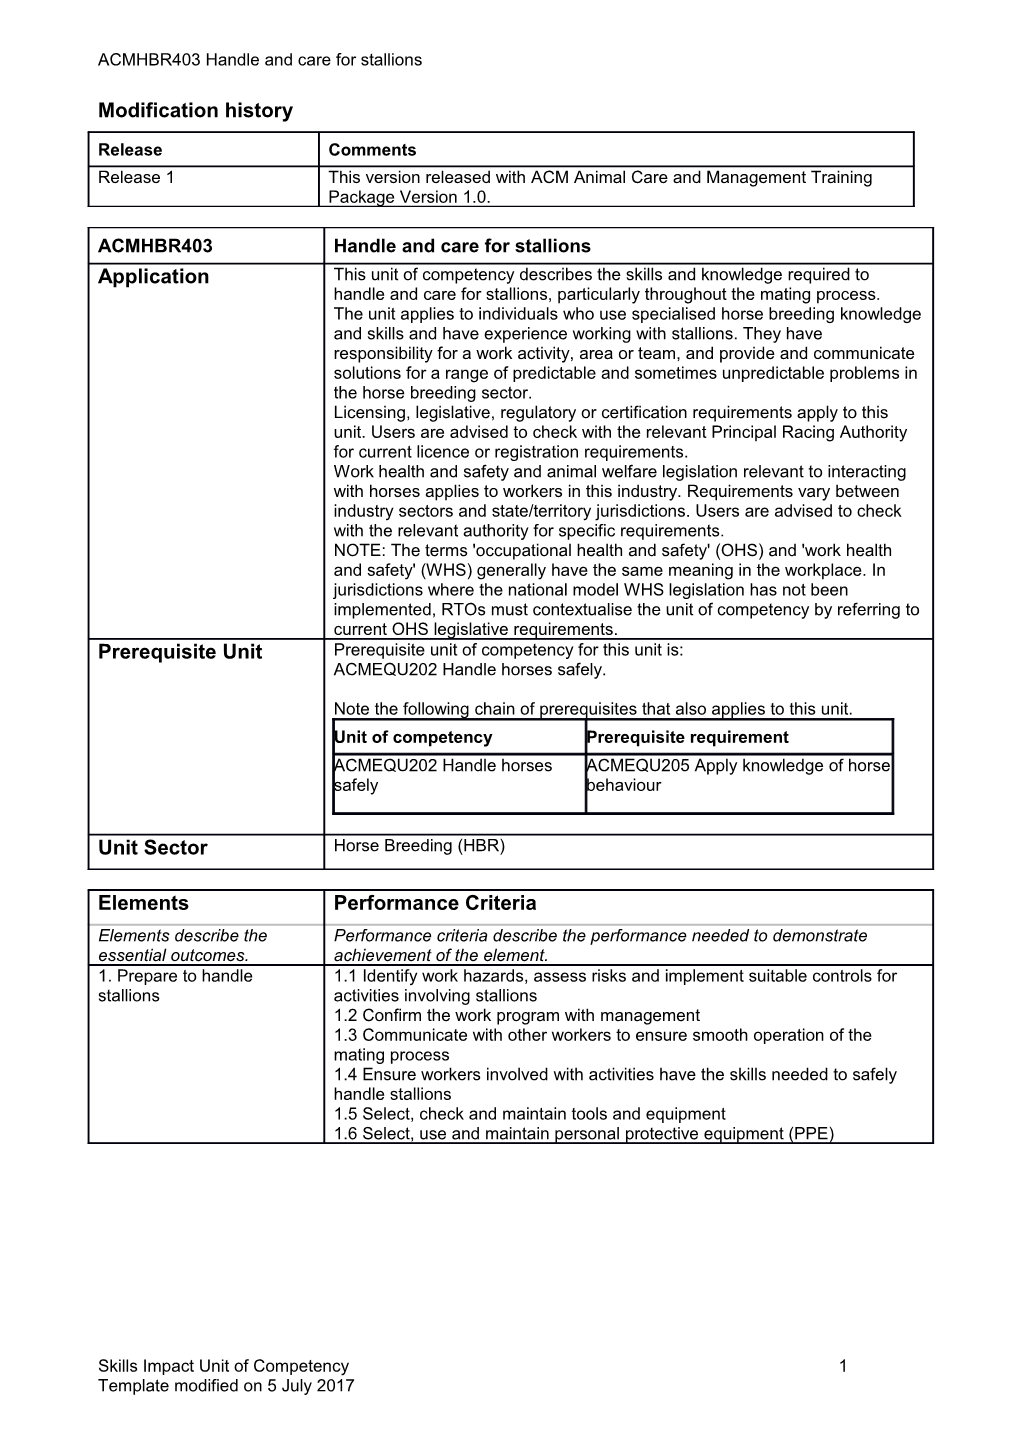 Skills Impact Unit of Competency Template s15